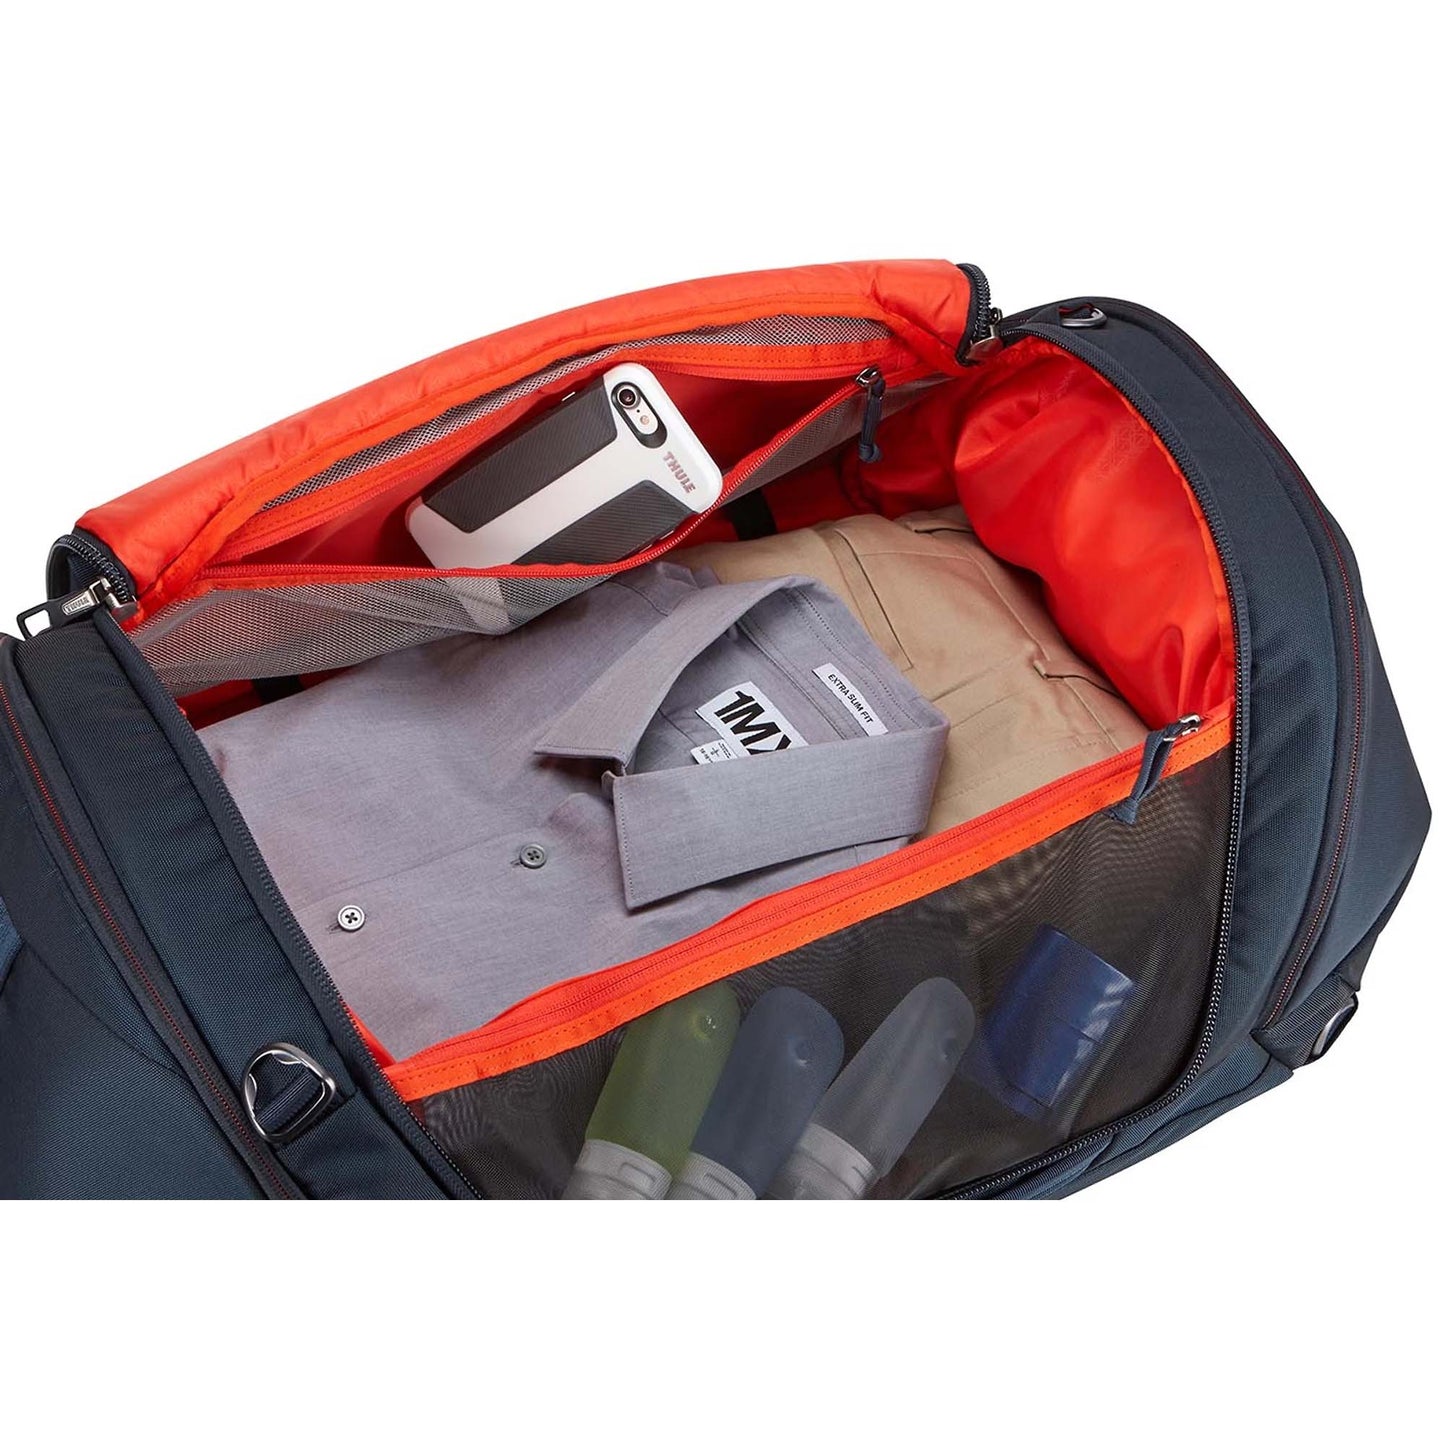 Thule Subterra Duffel 60L with Padded Shoulder Straps - Mineral (Barcode: 0085854240178 )